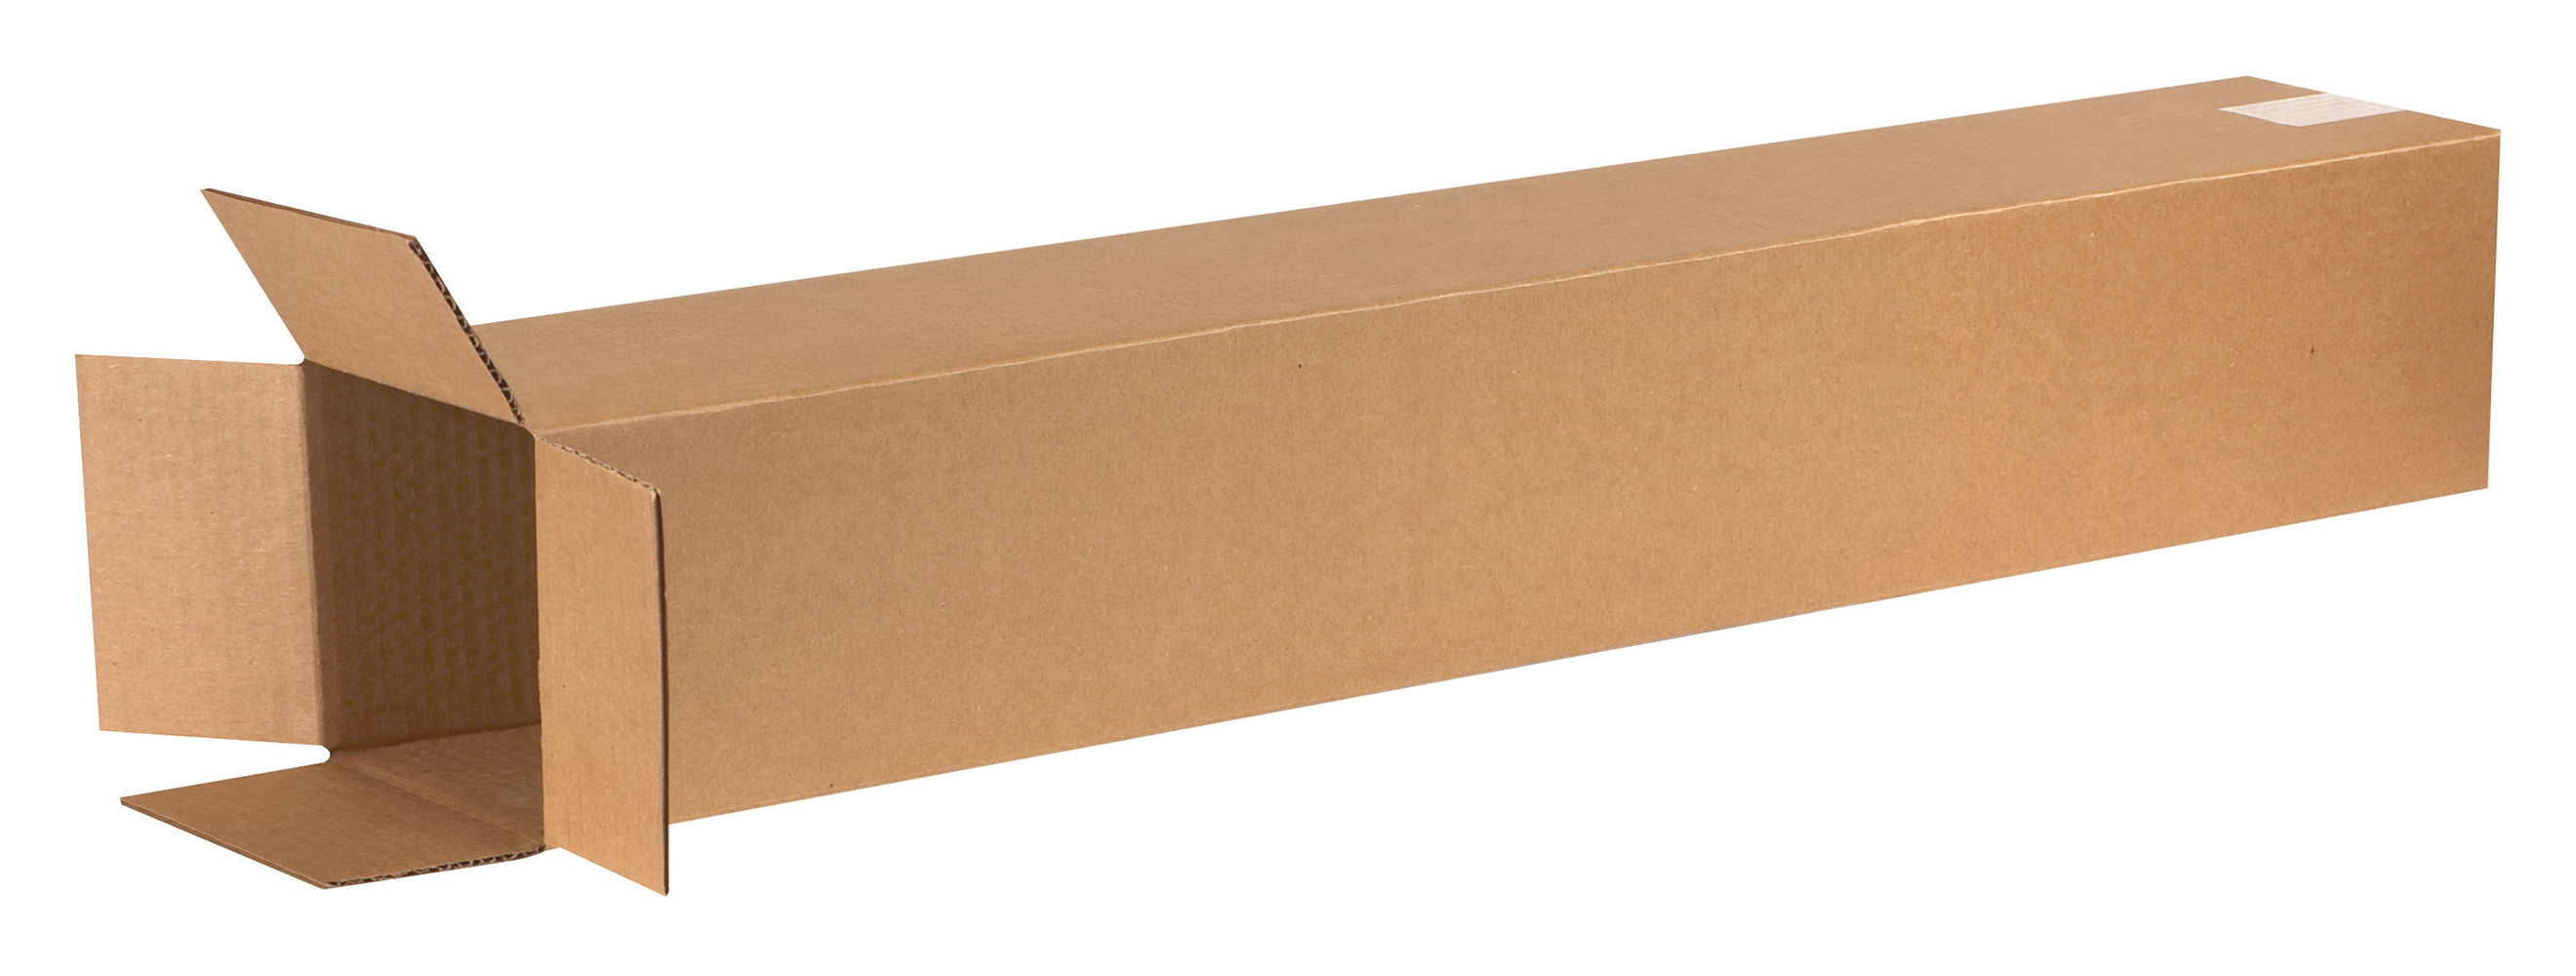 50 6x6x38 TALL Cardboard Shipping Boxes Corrugated Cartons 